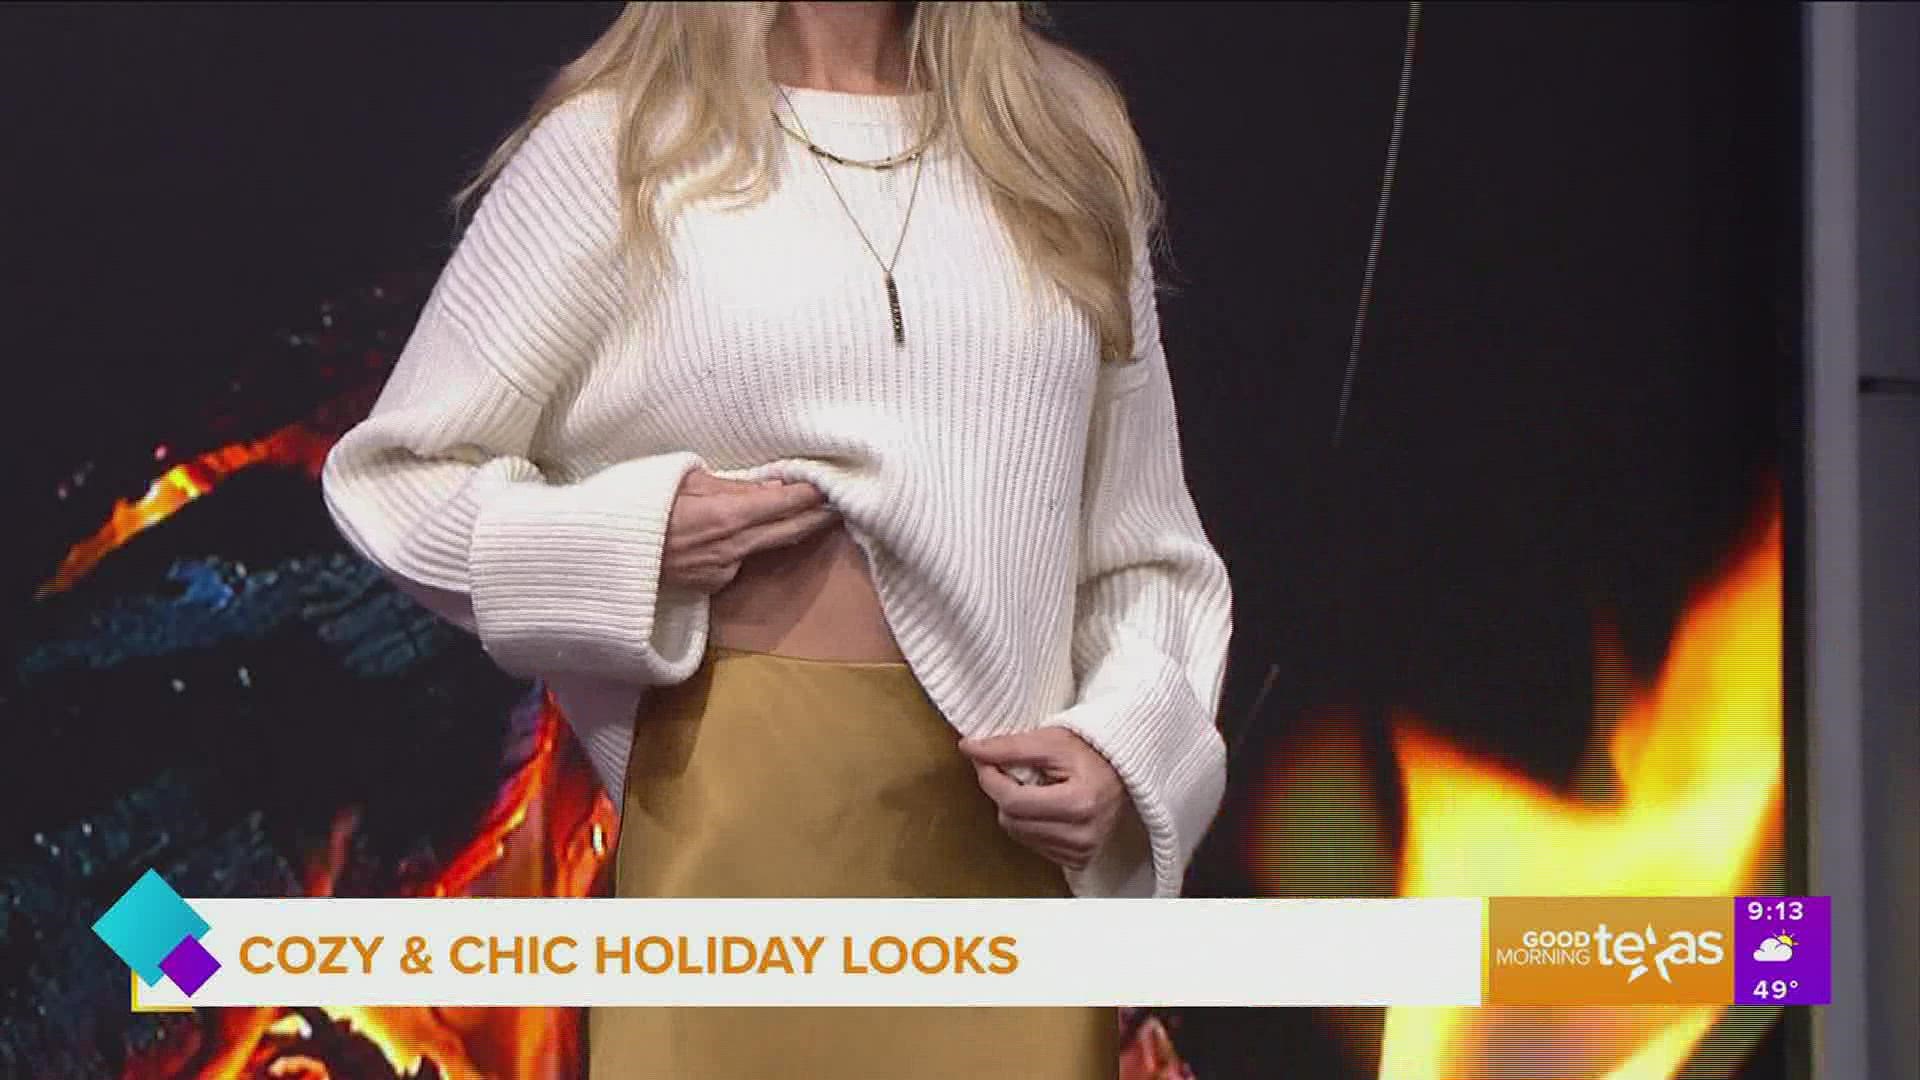 On Thanksgiving Day, you want to be chic, but also comfy in your stretchy pants so you can enjoy all that good food!